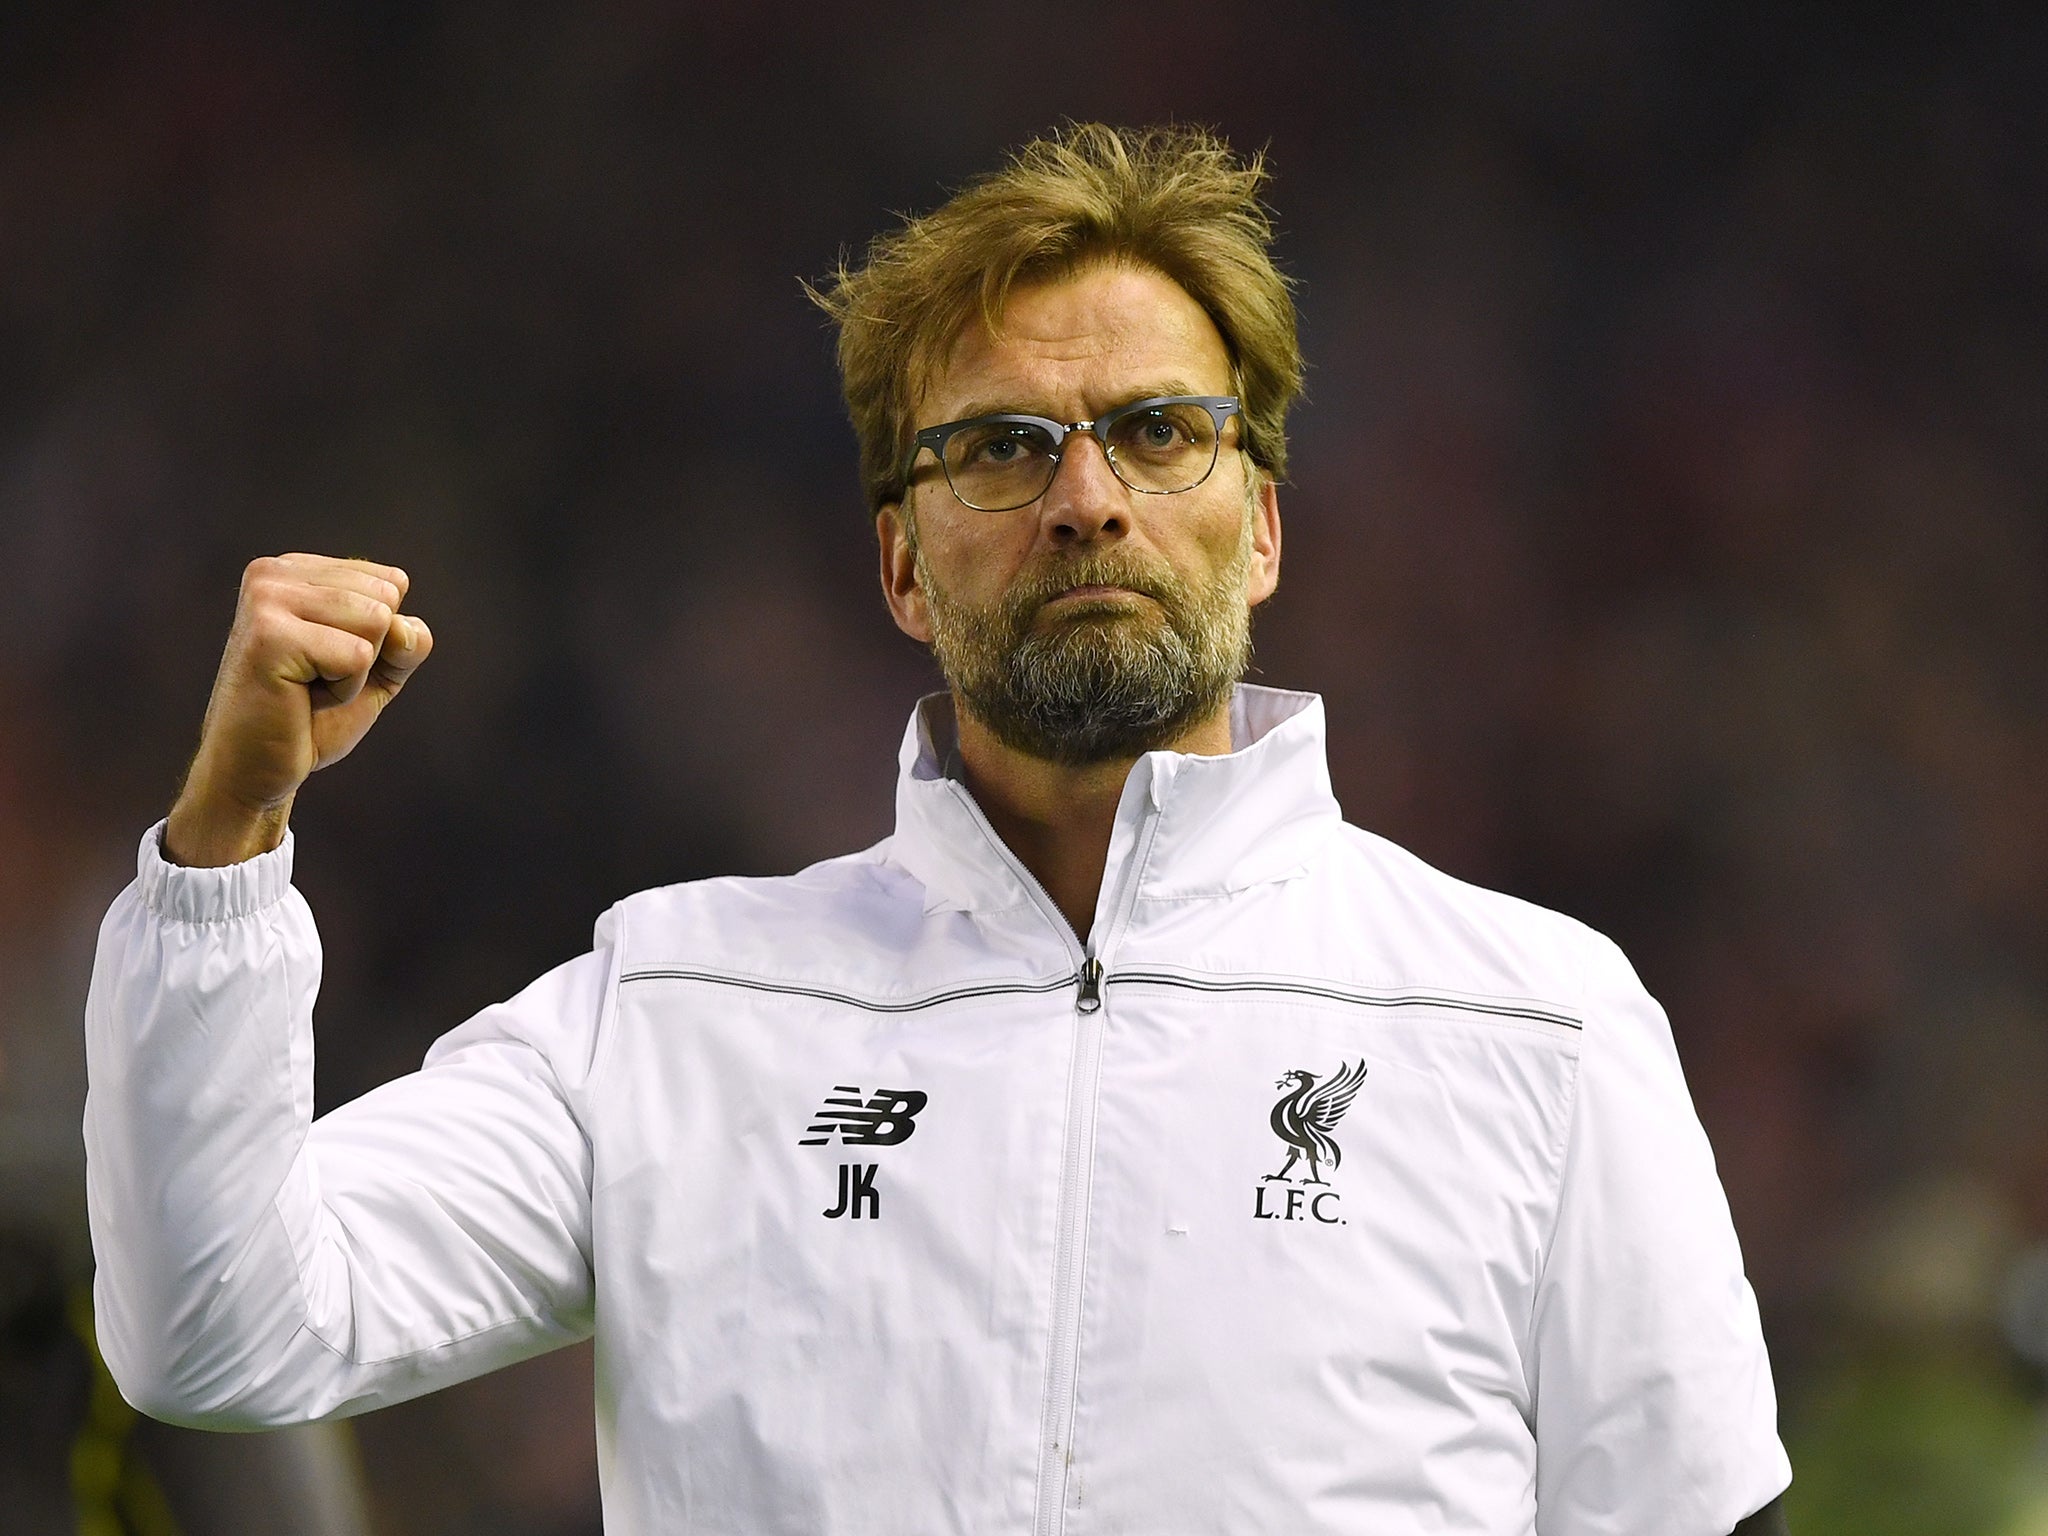 Klopp did not allow himself to be carried away by the Liverpool's brilliant win